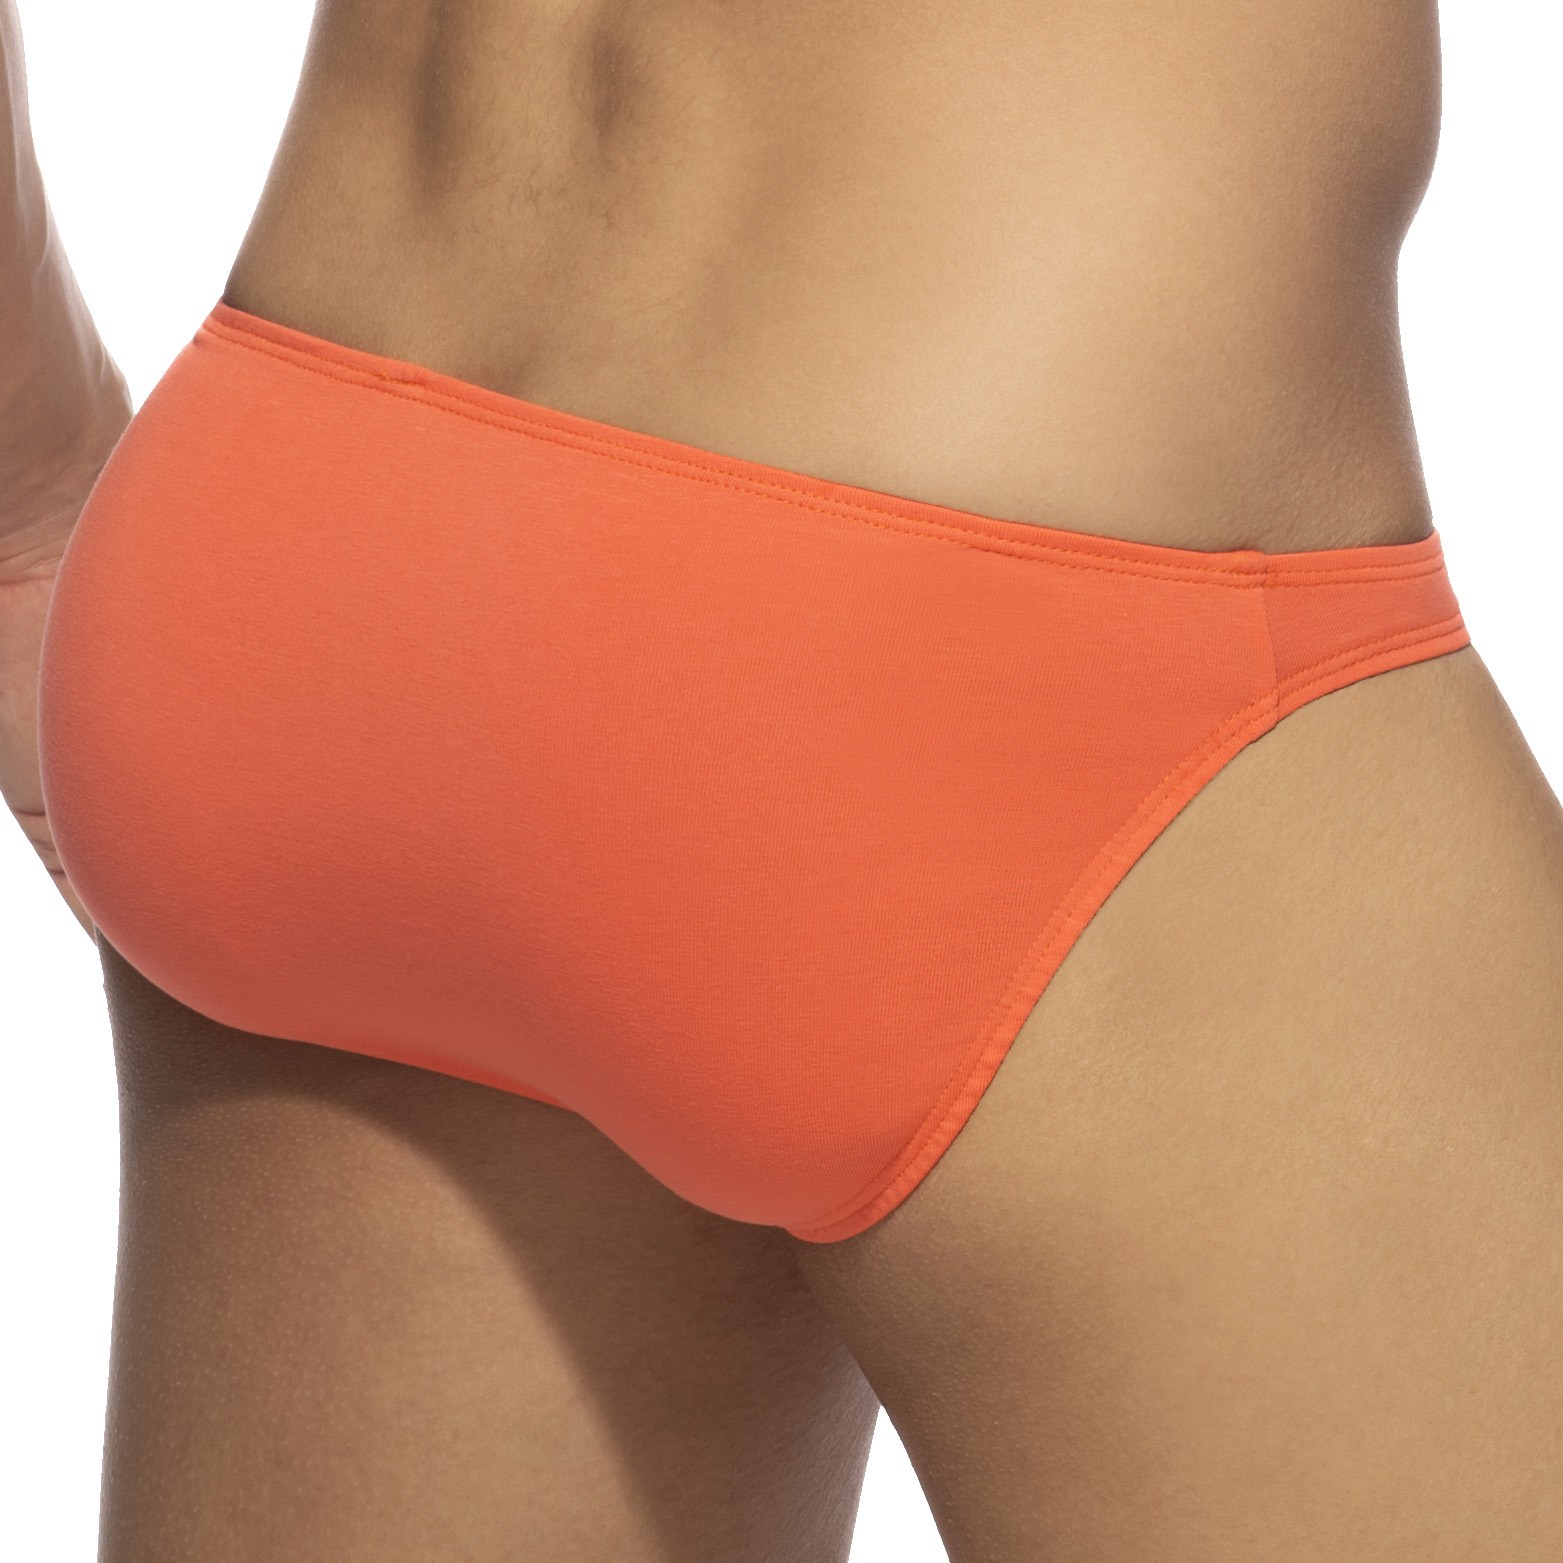 Bikini Cotton - coral: Briefs for man brand ADDICTED for sale onlin